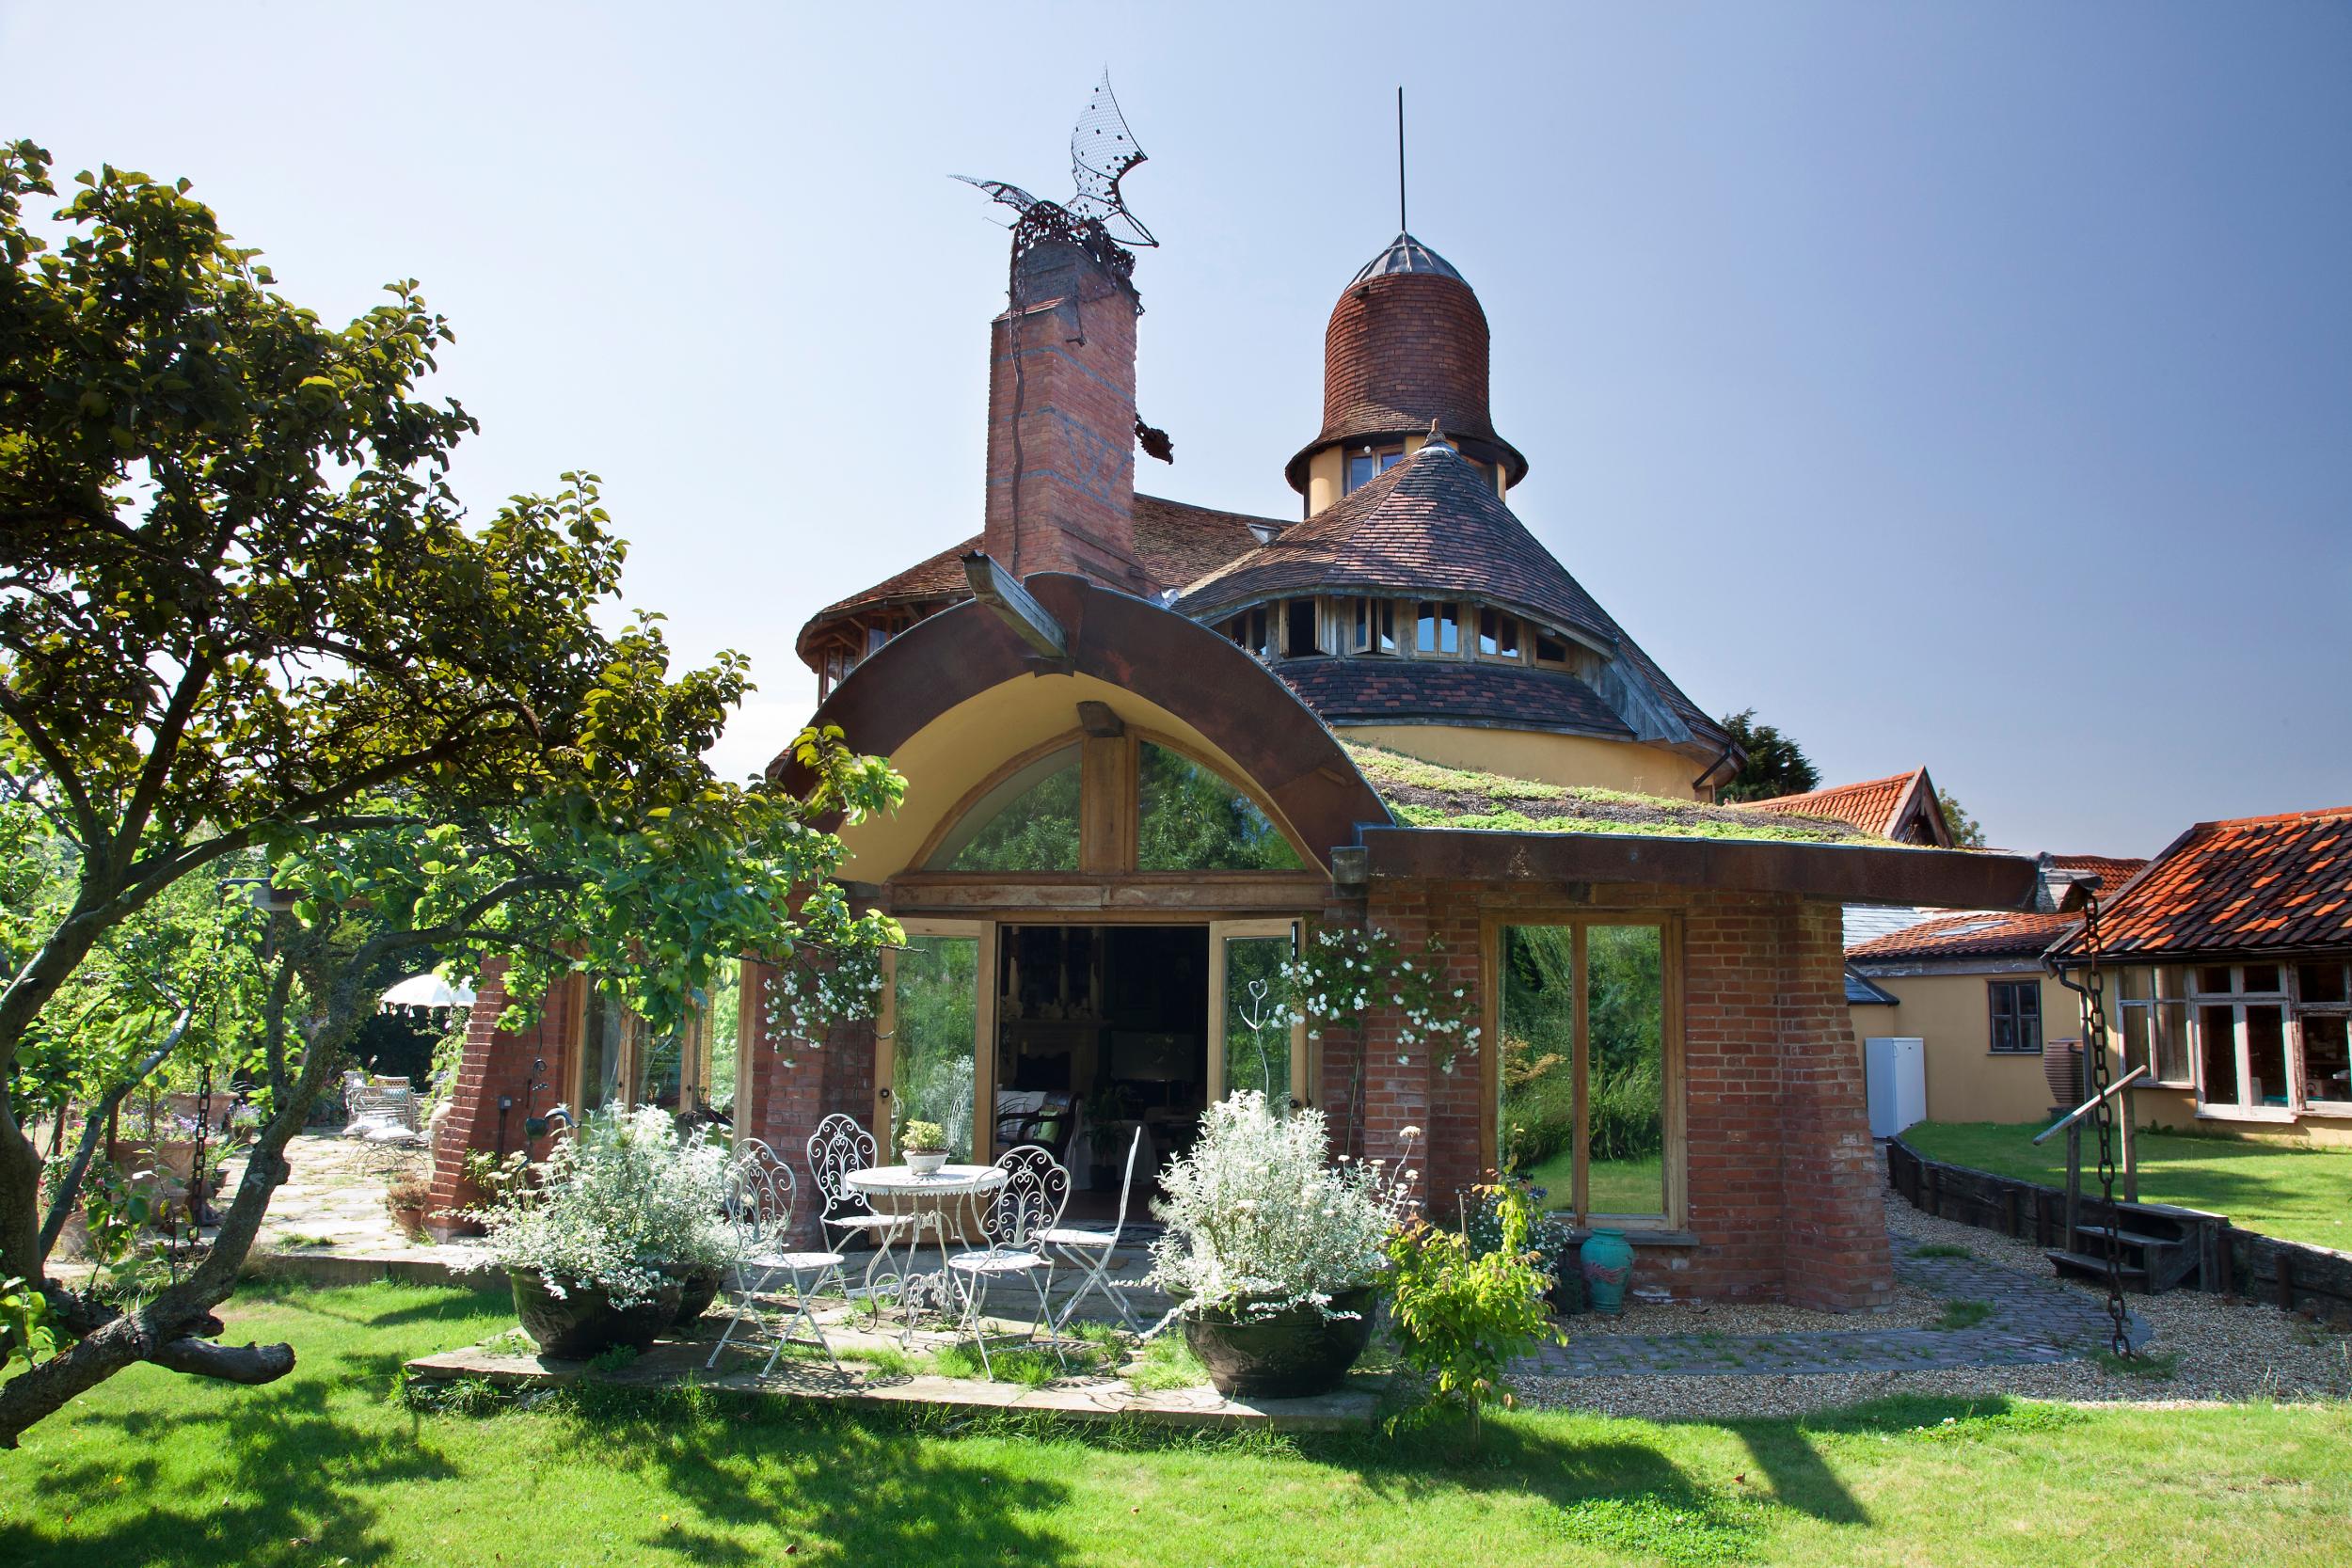 Here be dragons: Airbnb has some of the quirkiest listings around